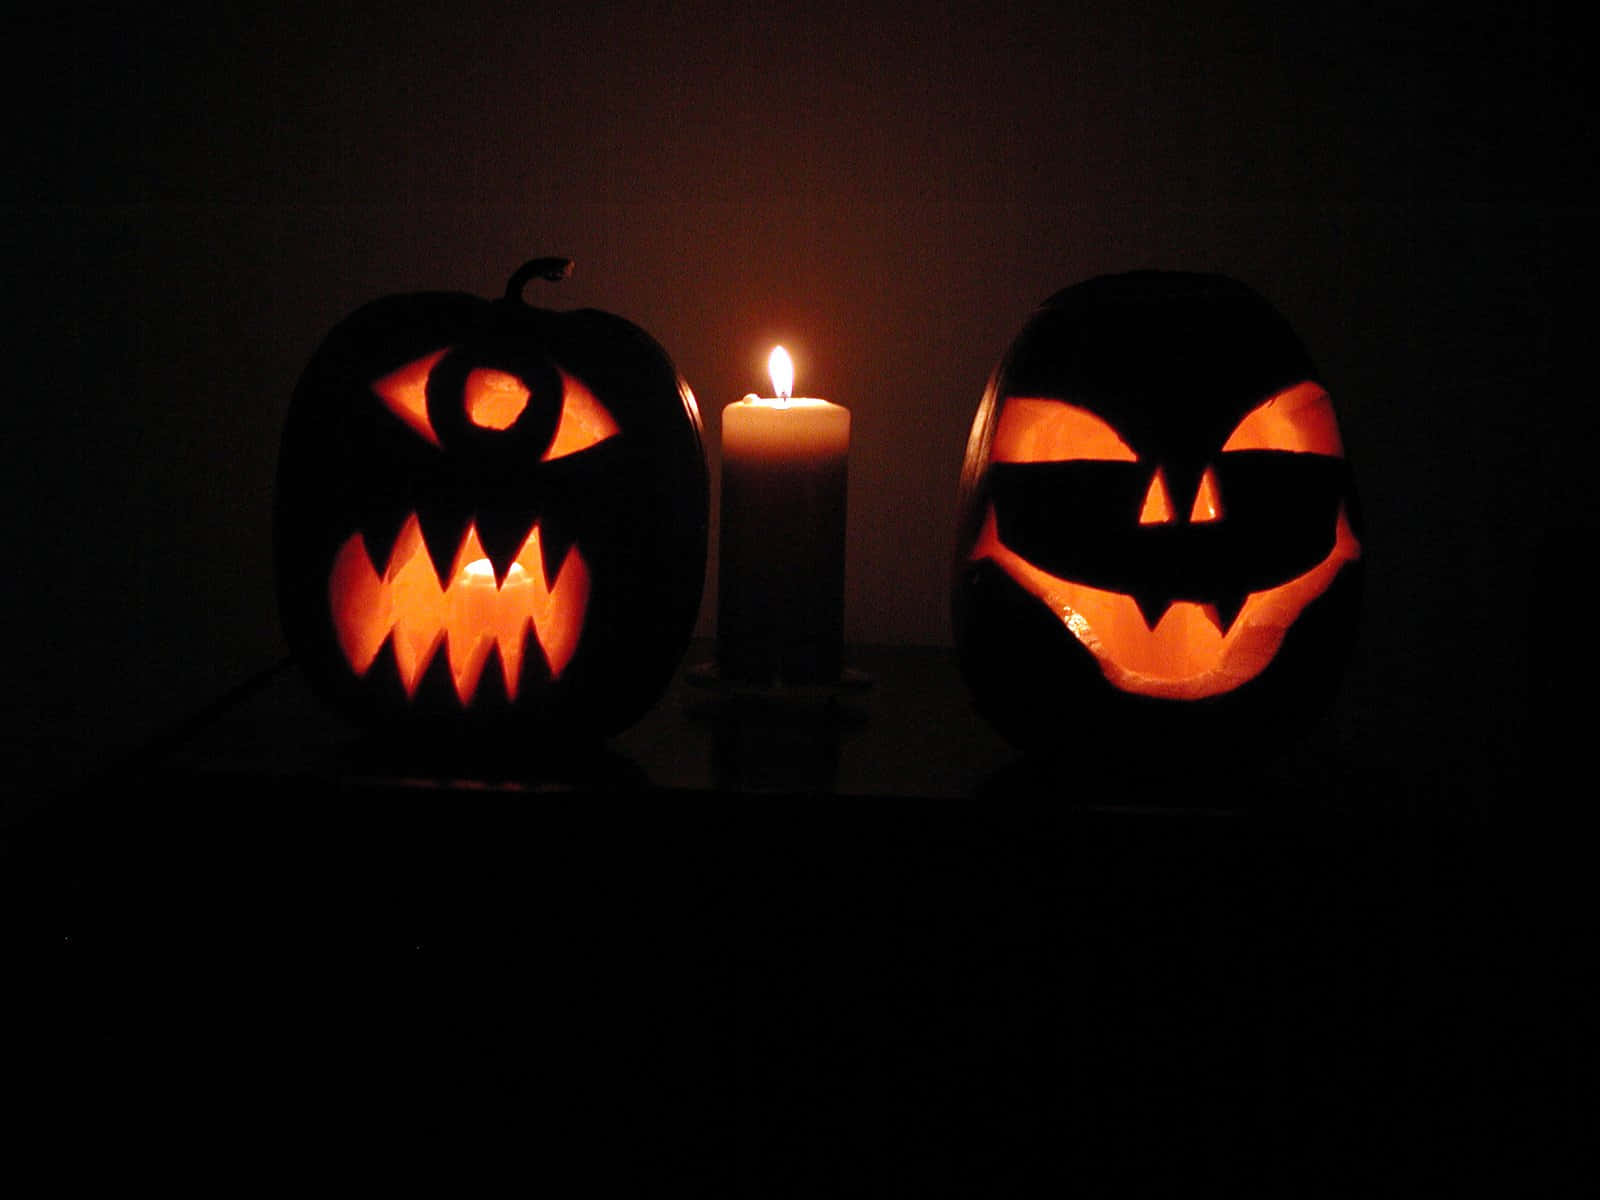 "Spooky Halloween Carving - The Jack O Lantern is ready!"